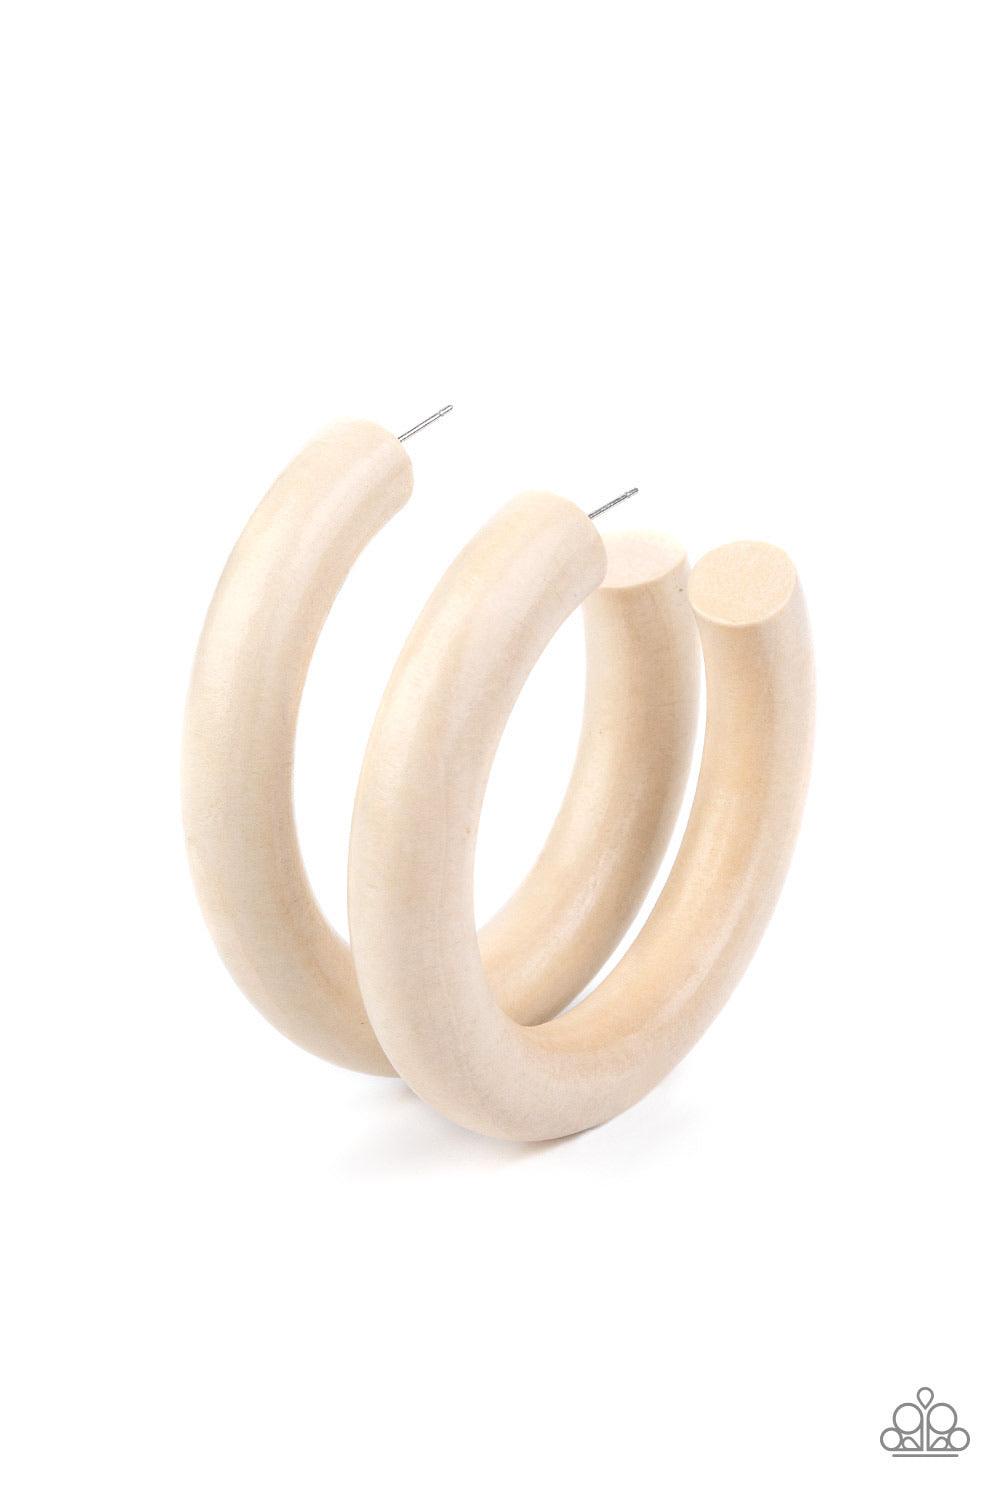 Paparazzi Accessories I WOOD Walk 500 Miles - White Painted in a neutral white finish, a thick wooden frame dramatically curls into an oversized hoop for a colorfully retro look. Earring attaches to a standard post fitting. Hoop measure approximately 2 1/